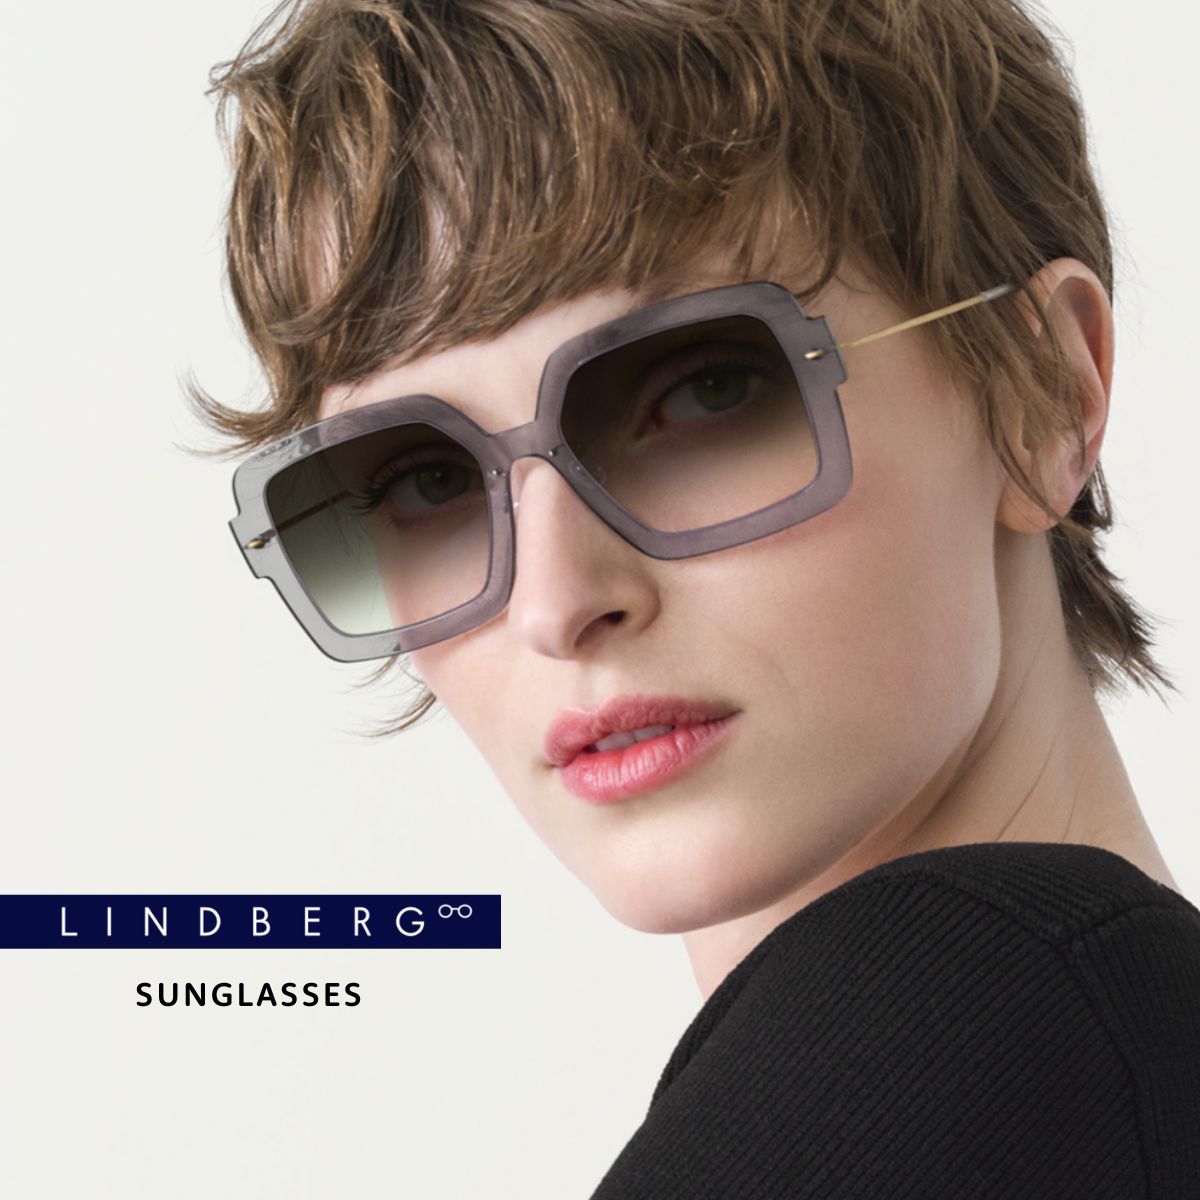 "Trendiest sunglasses for men and women at Optorium: Lindberg and more. Classic and contemporary styles available. Shop luxury sunglasses now."